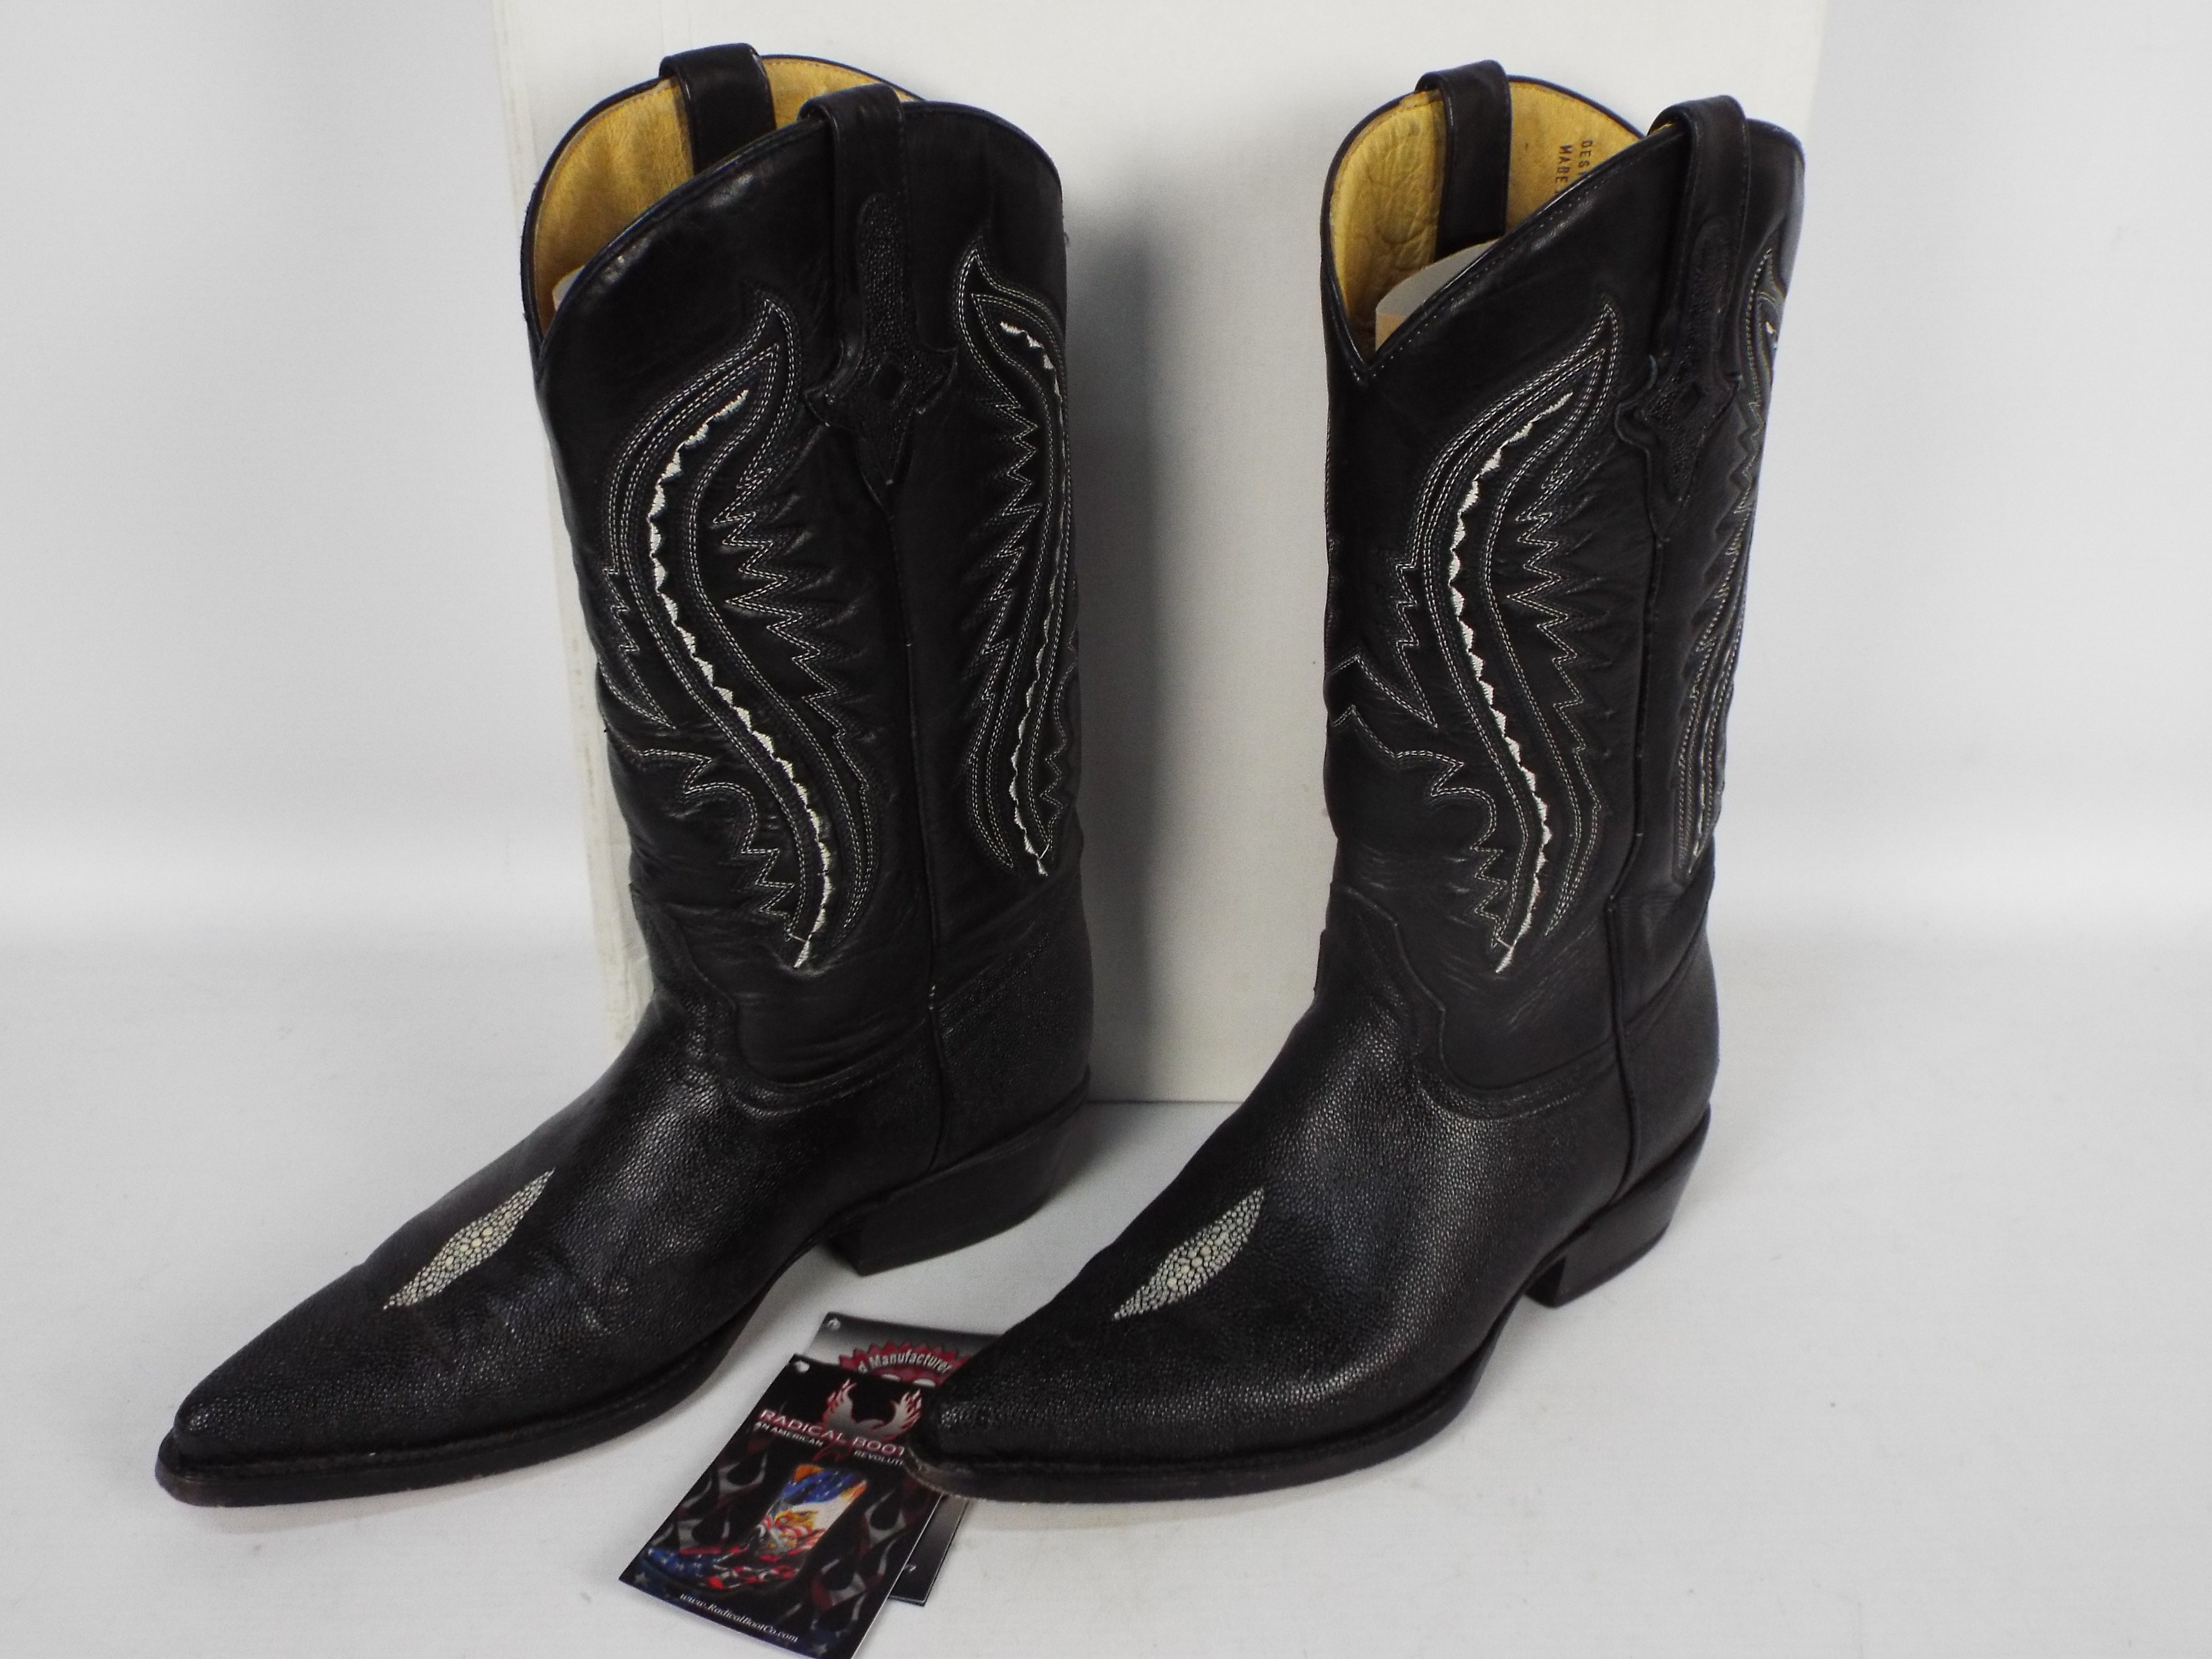 Radical Boot Co - a pair of Stingray black boots # 54W, special western boots, UK size 6, US size 7. - Image 2 of 3